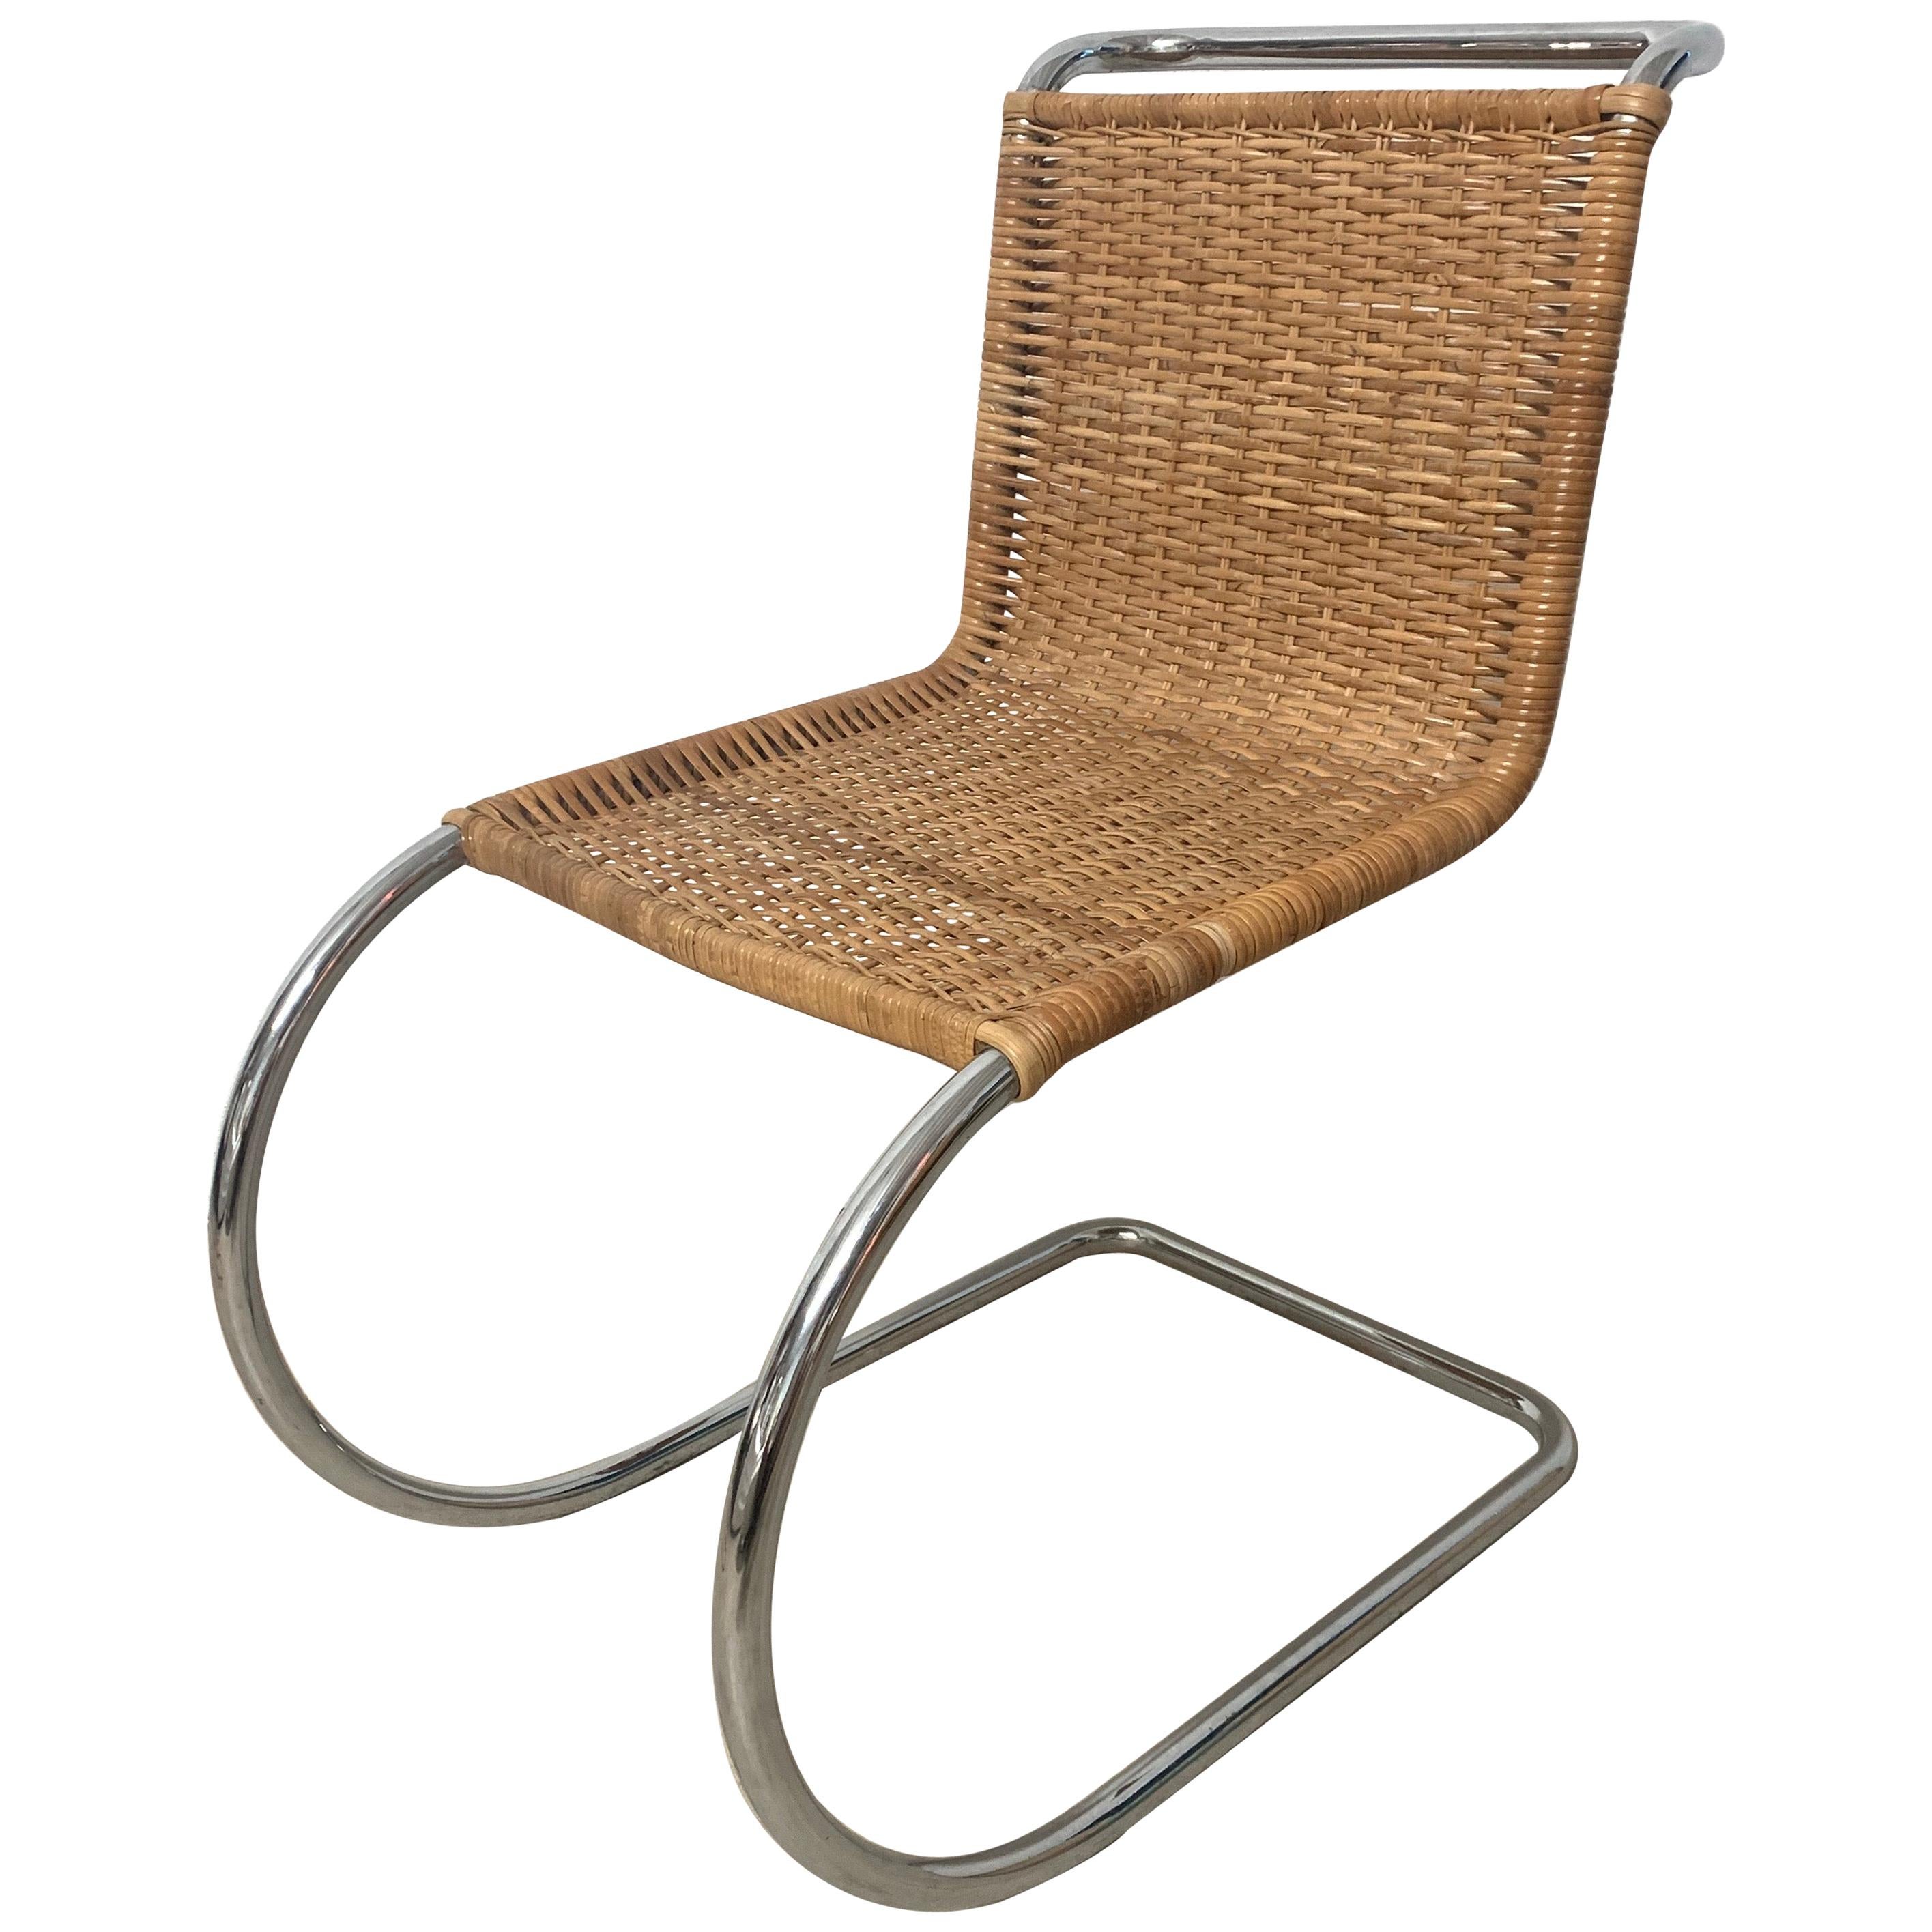 Early Mies Van Der Rohe "MR 10" Chair in Wicker and Chrome Steel, Italy, 1950s